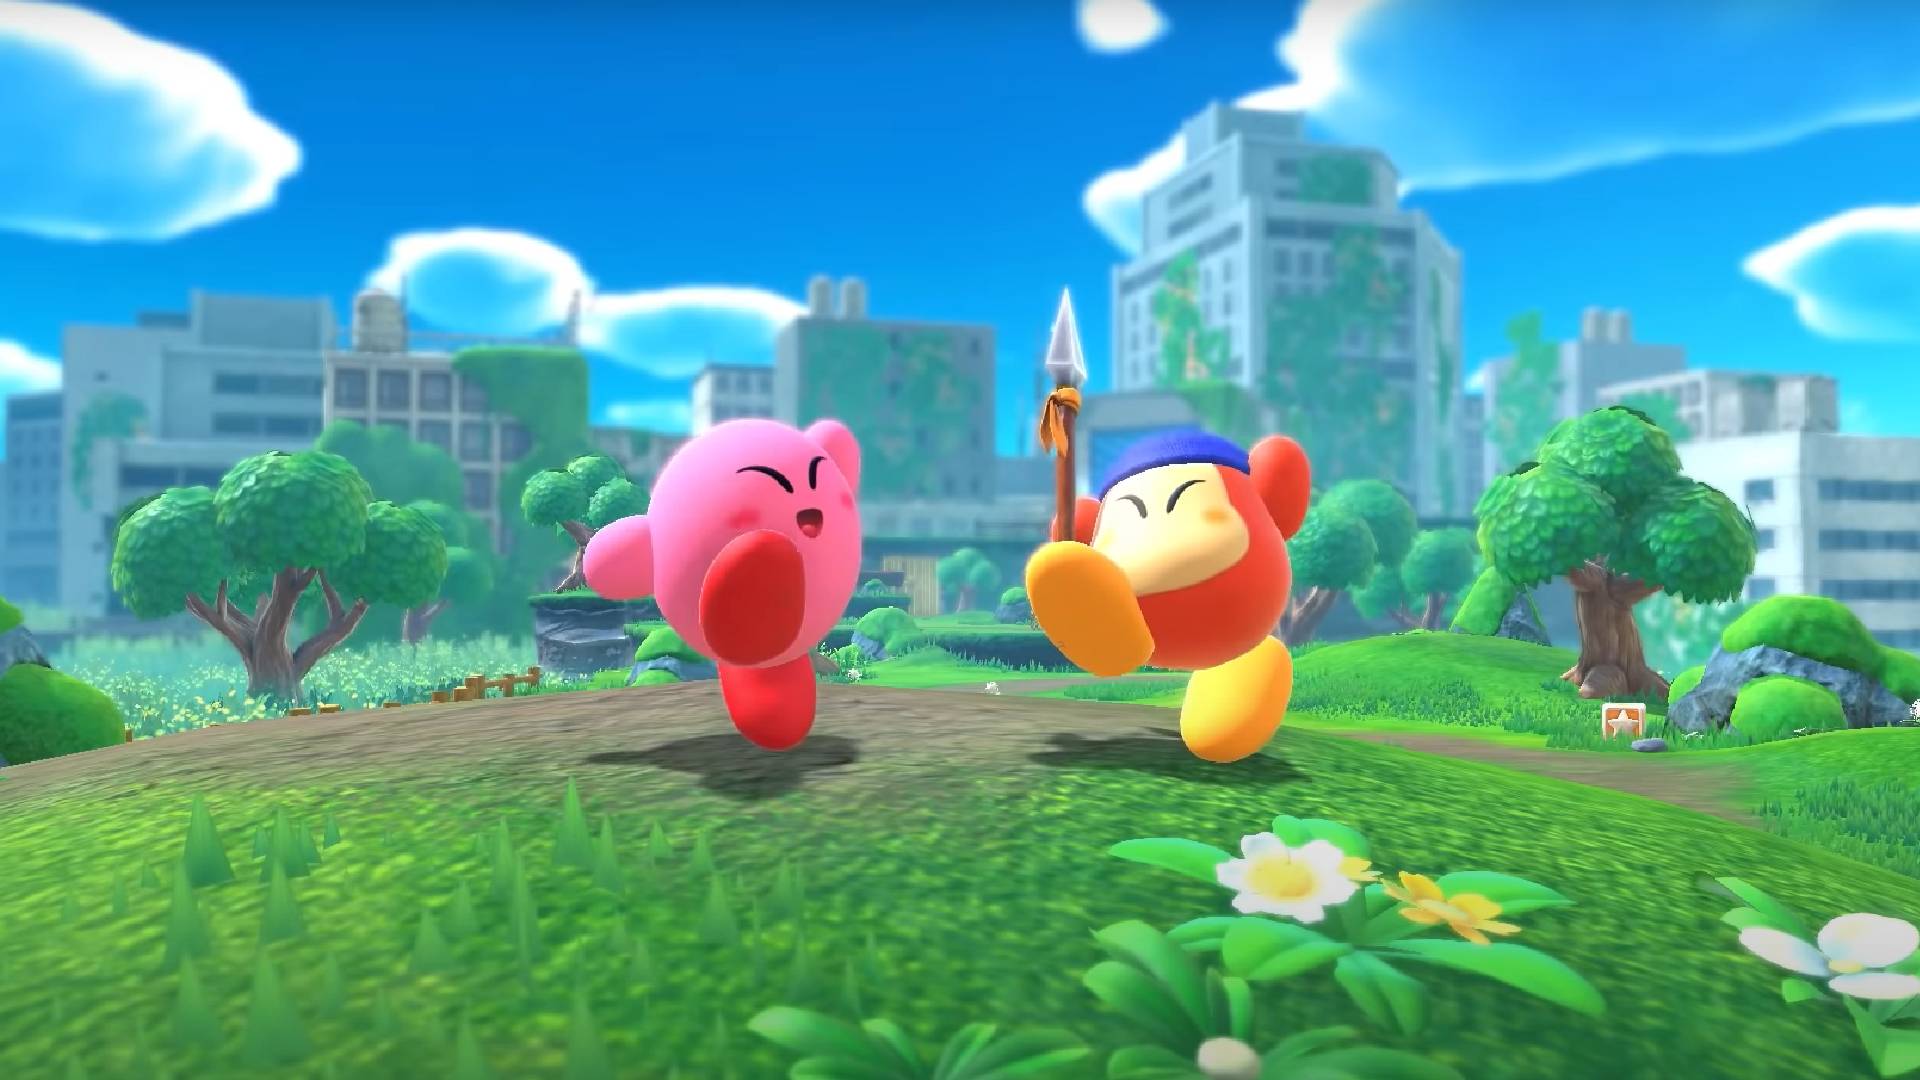 Kirby and the Land release date, trailers, and more